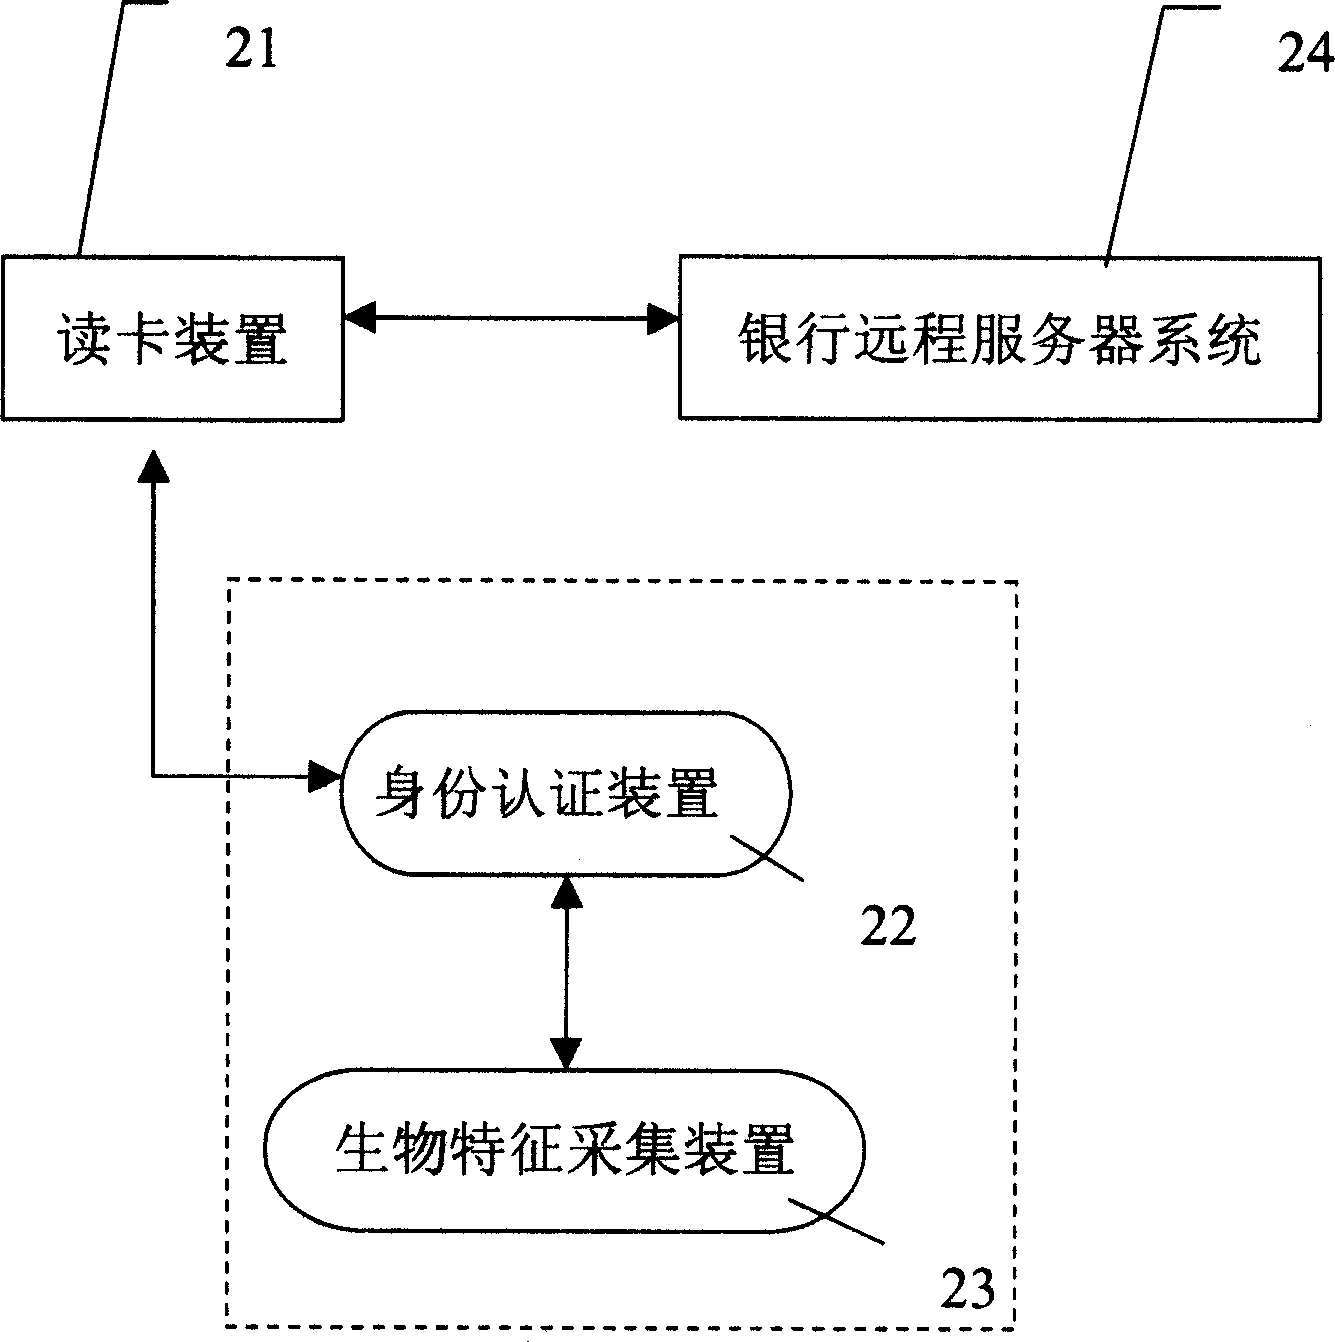 High-performance biological characteristic authentication system